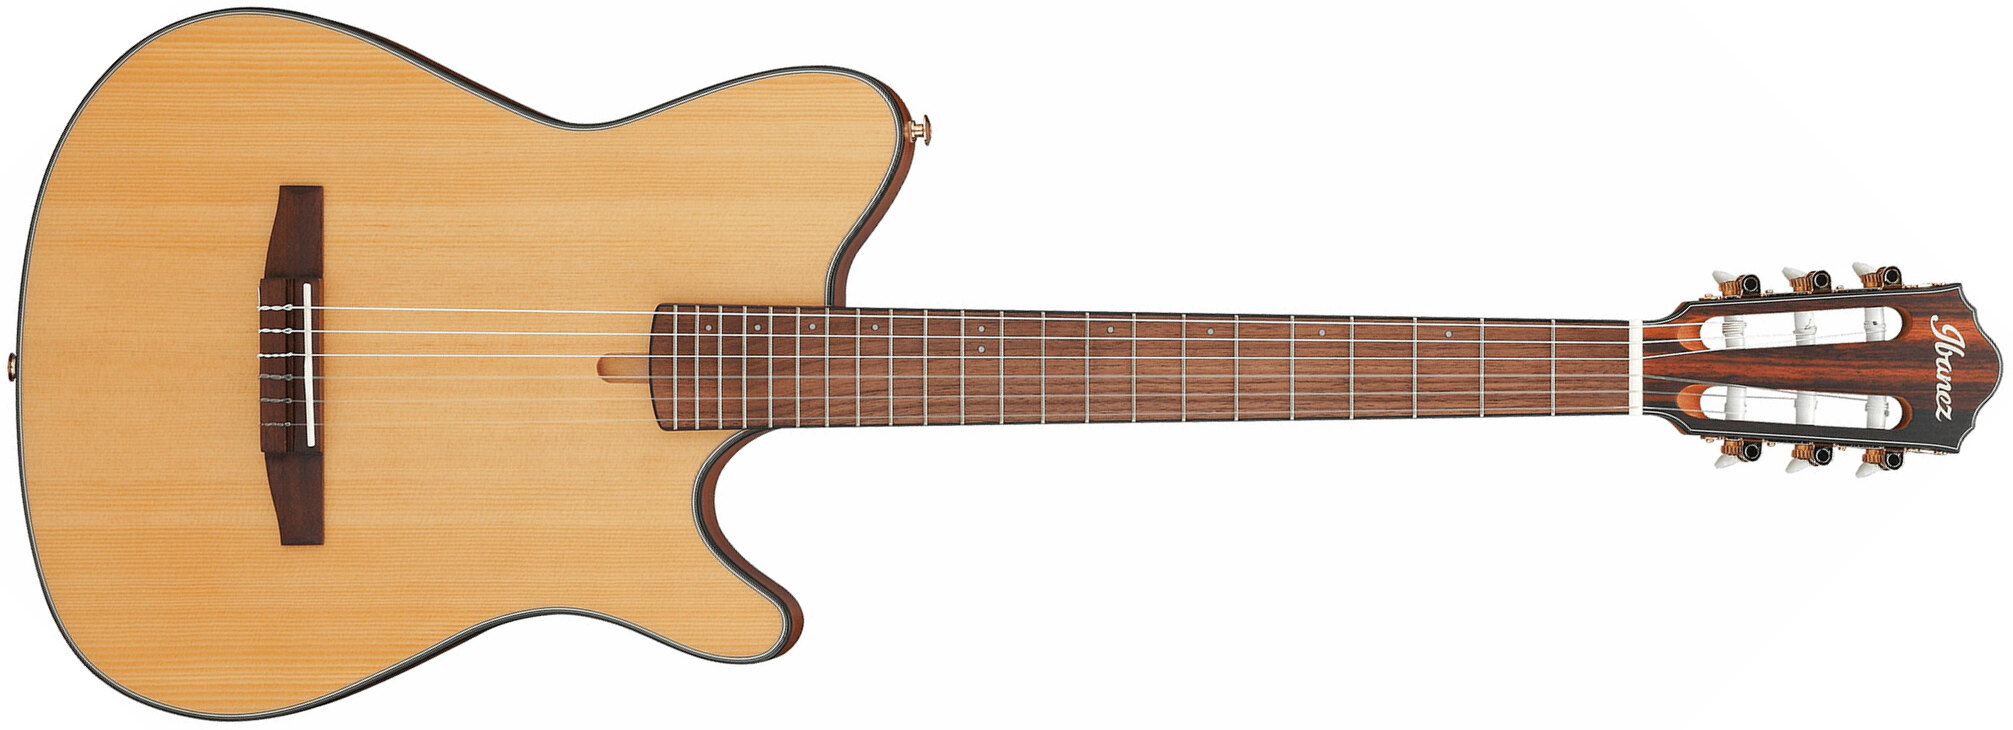 Ibanez Frh10n Ntf Hybrid Cw Epicea Sapele Wal - Natural Flat - Guitare Classique Format 4/4 - Main picture